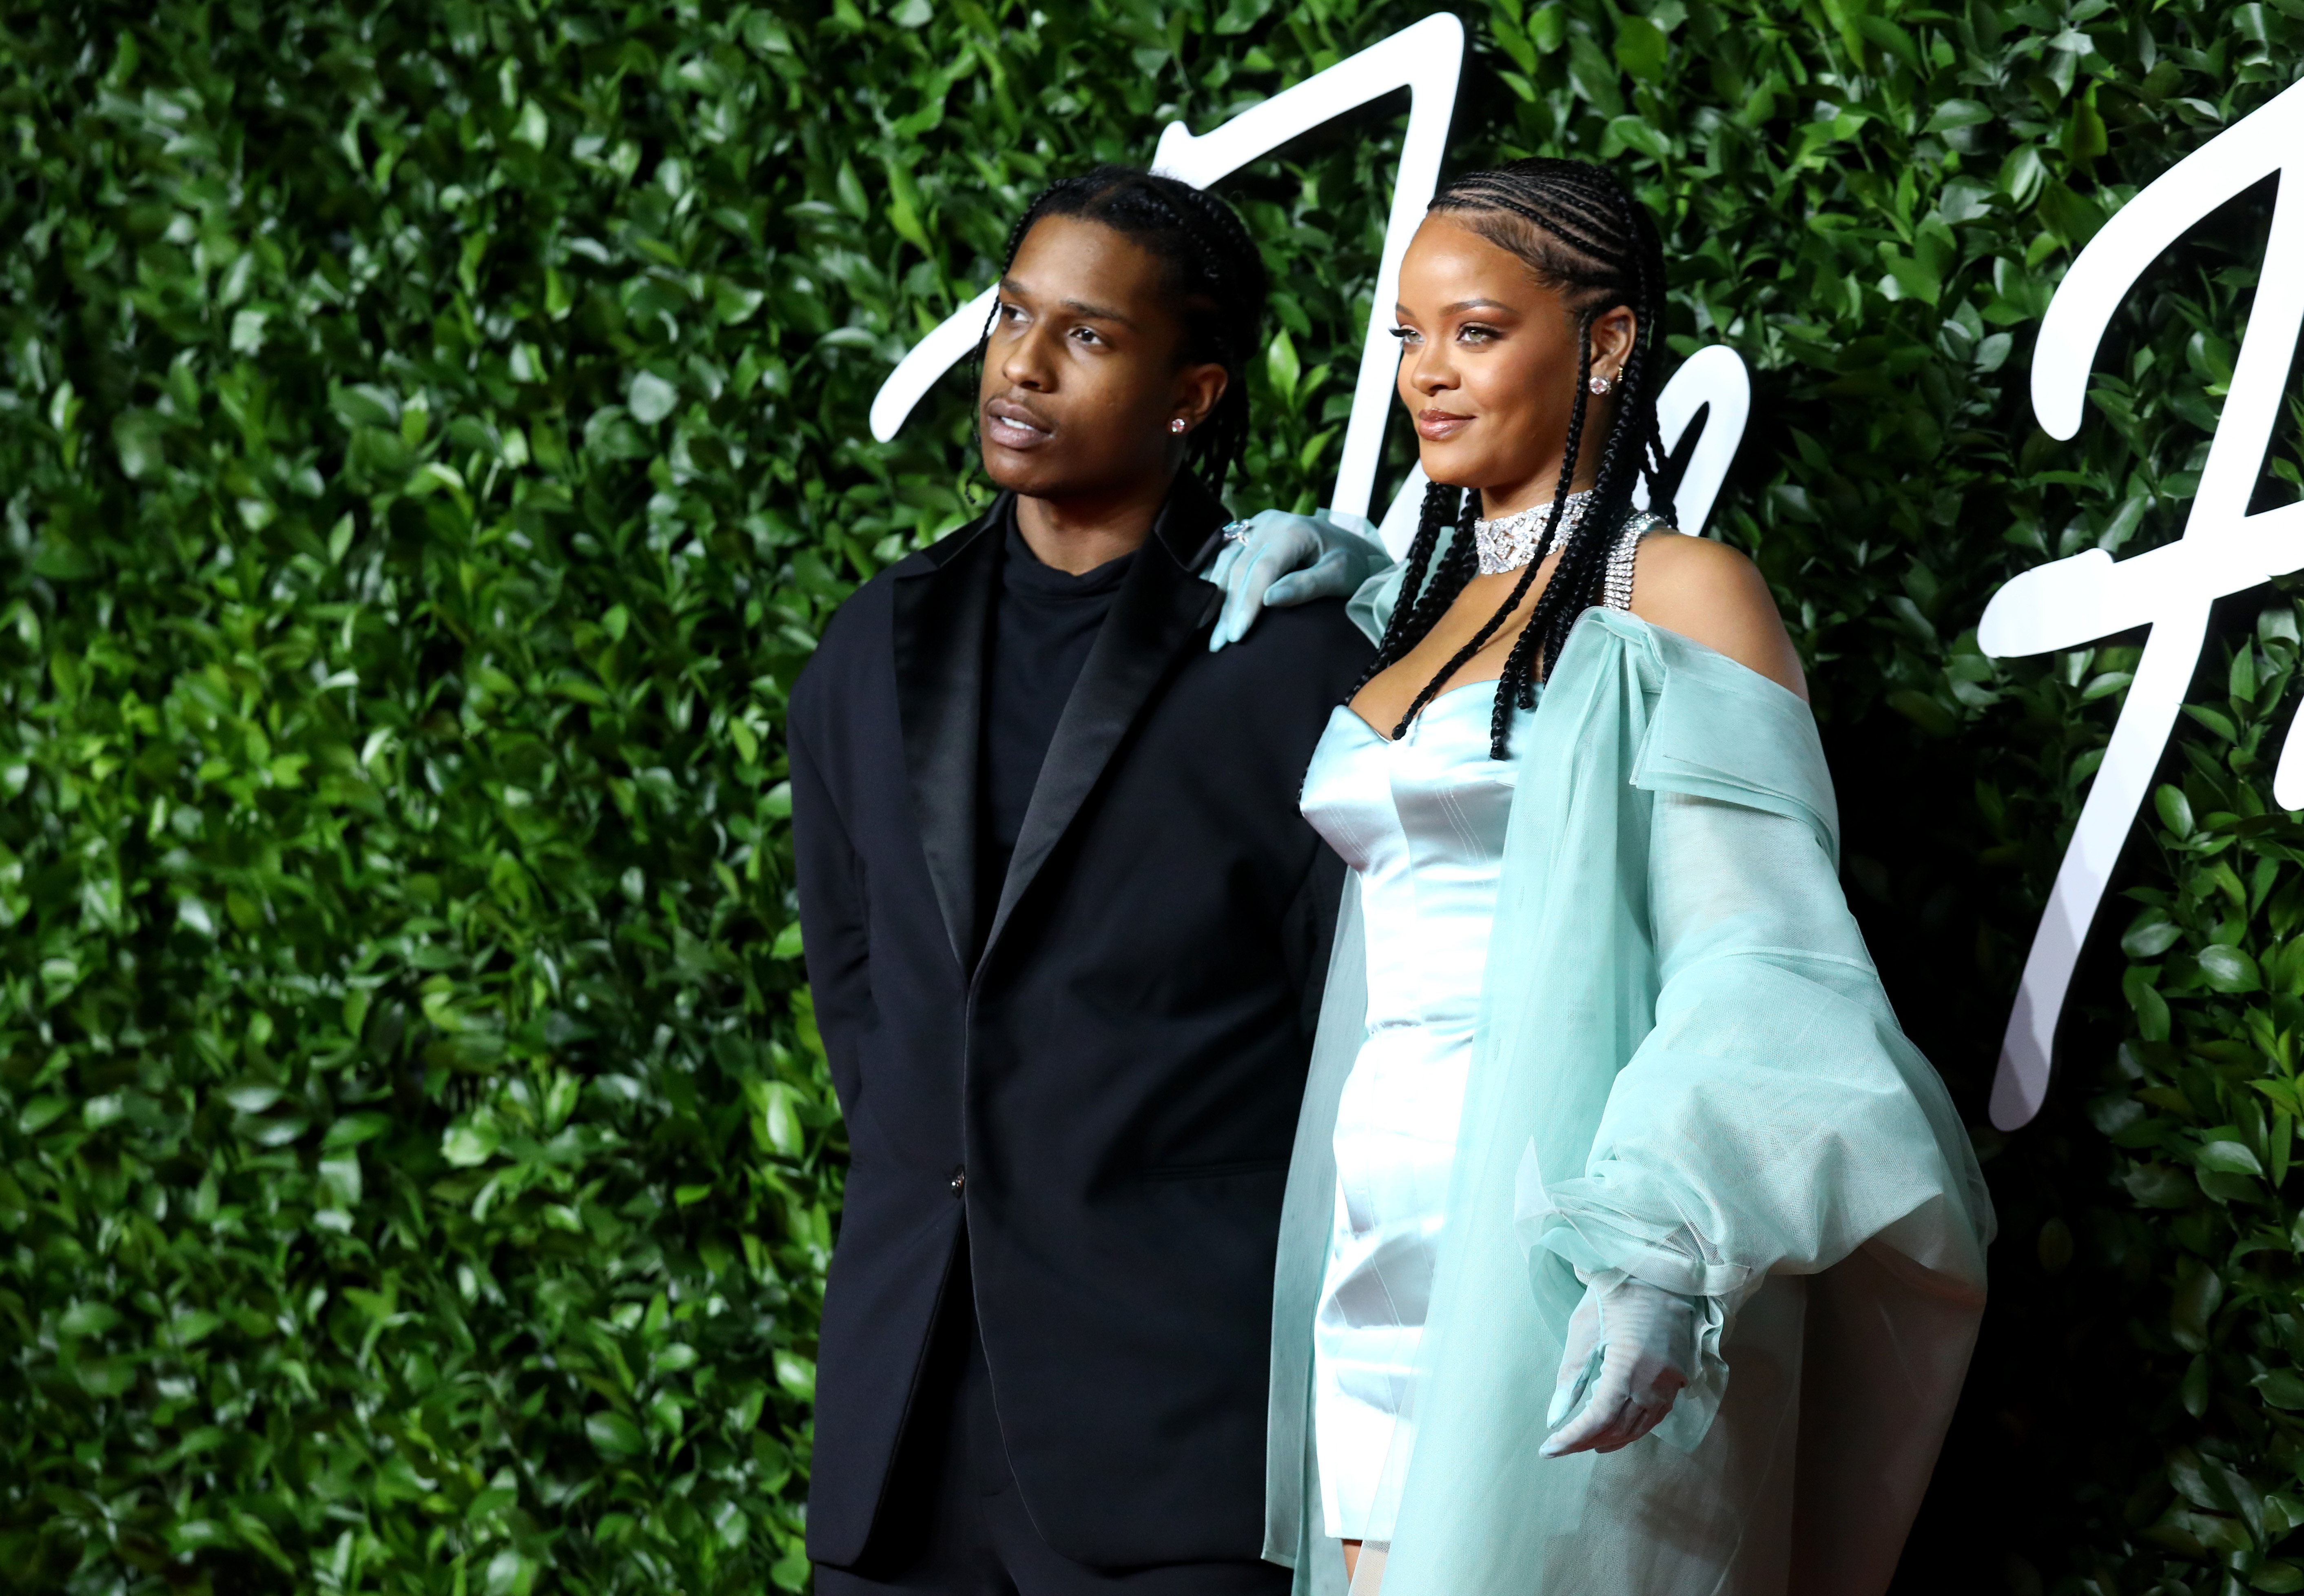 A$AP Rocky and Rihanna attend The Fashion Awards 2019 at Royal Albert Hall on December 2, 2019 in London, England. | Source: Getty Images